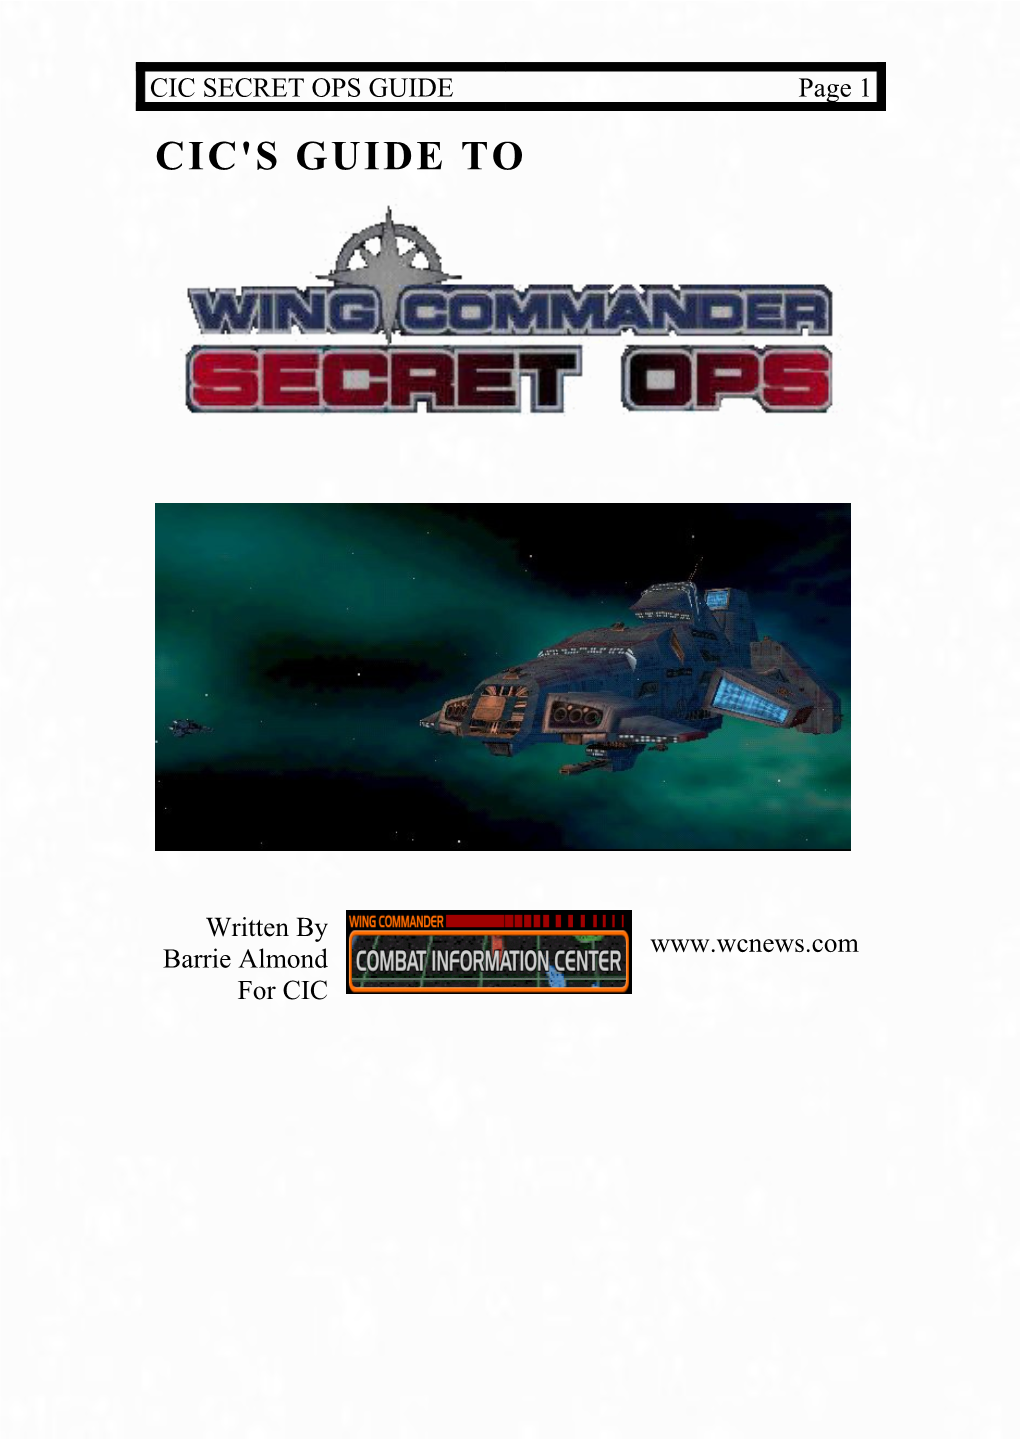 Cic's Guide to Secret Ops